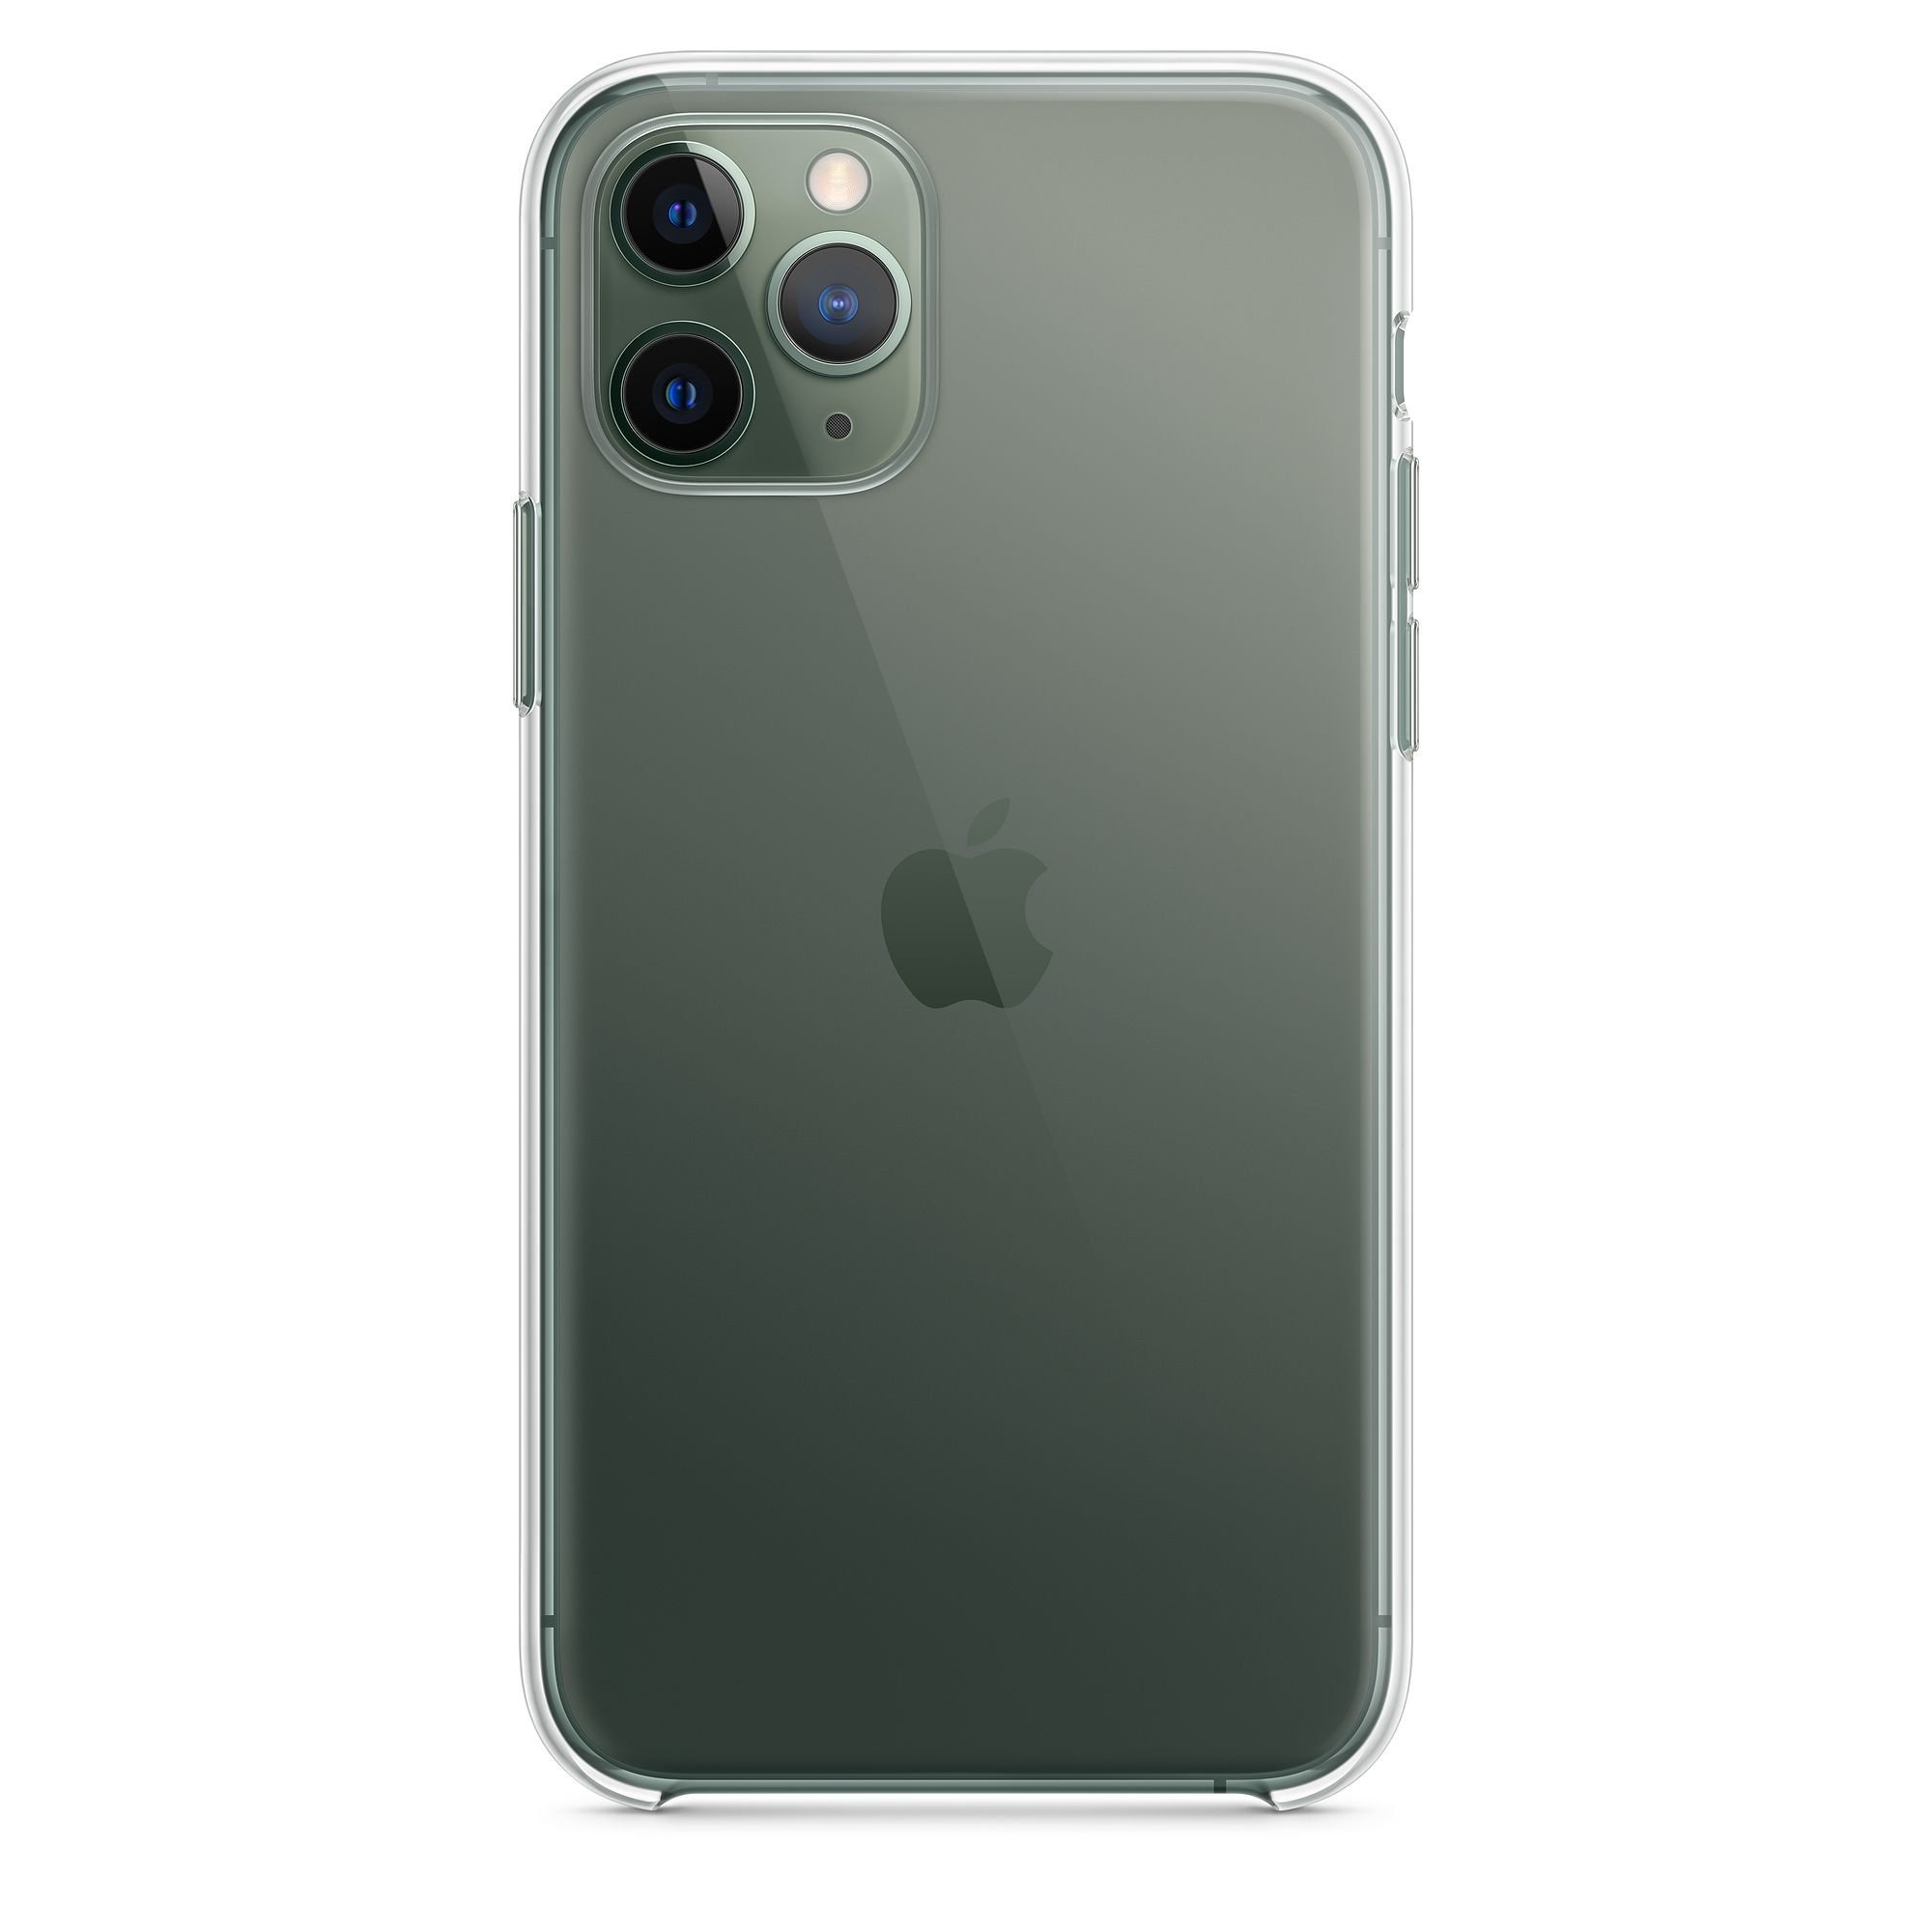 Ốp Lưng Dẽo Silicone Dành Cho Apple: iPhone 11, iPhone 11 Pro (Trong suốt